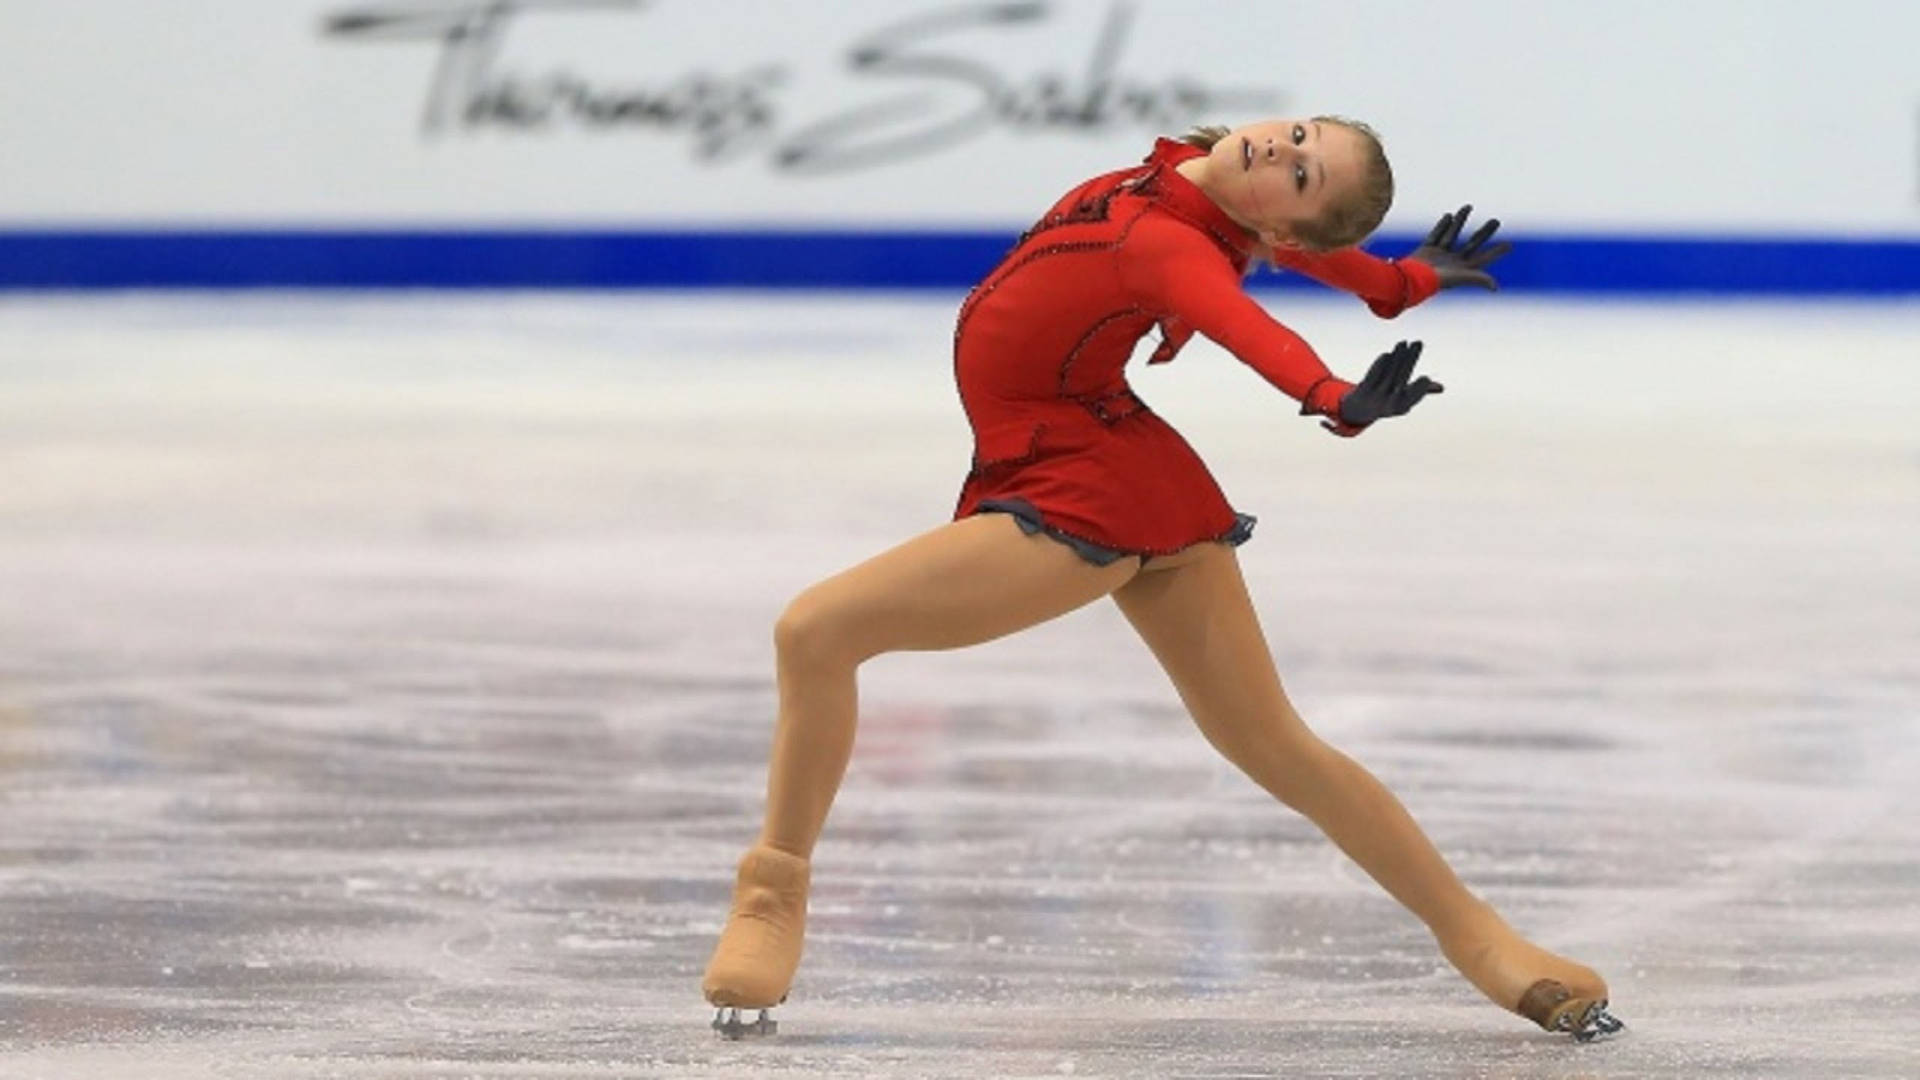 Inspiring Figure Skating Performance In The Olympics